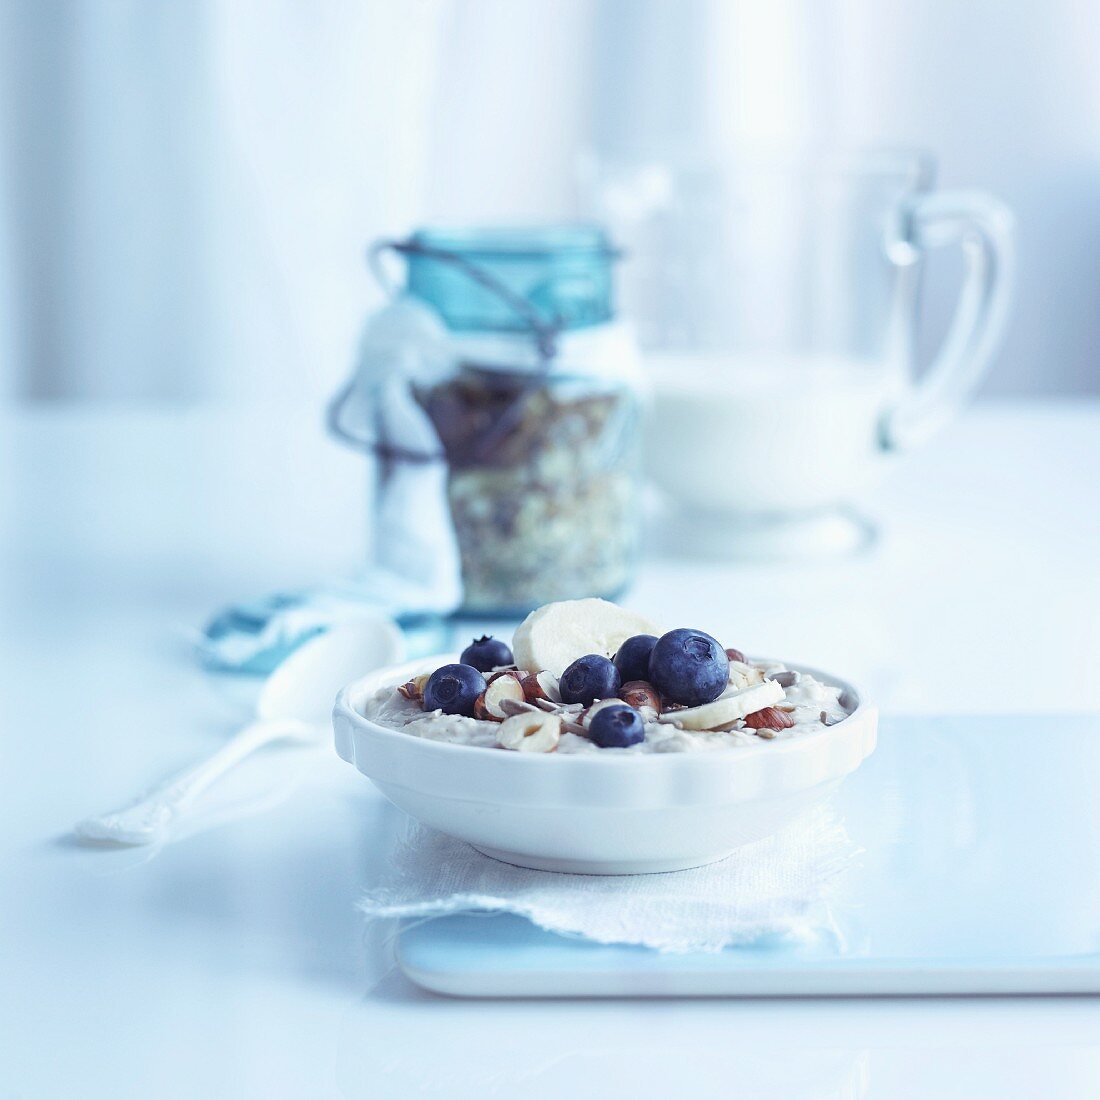 Porridge with nuts, bananas and blueberries